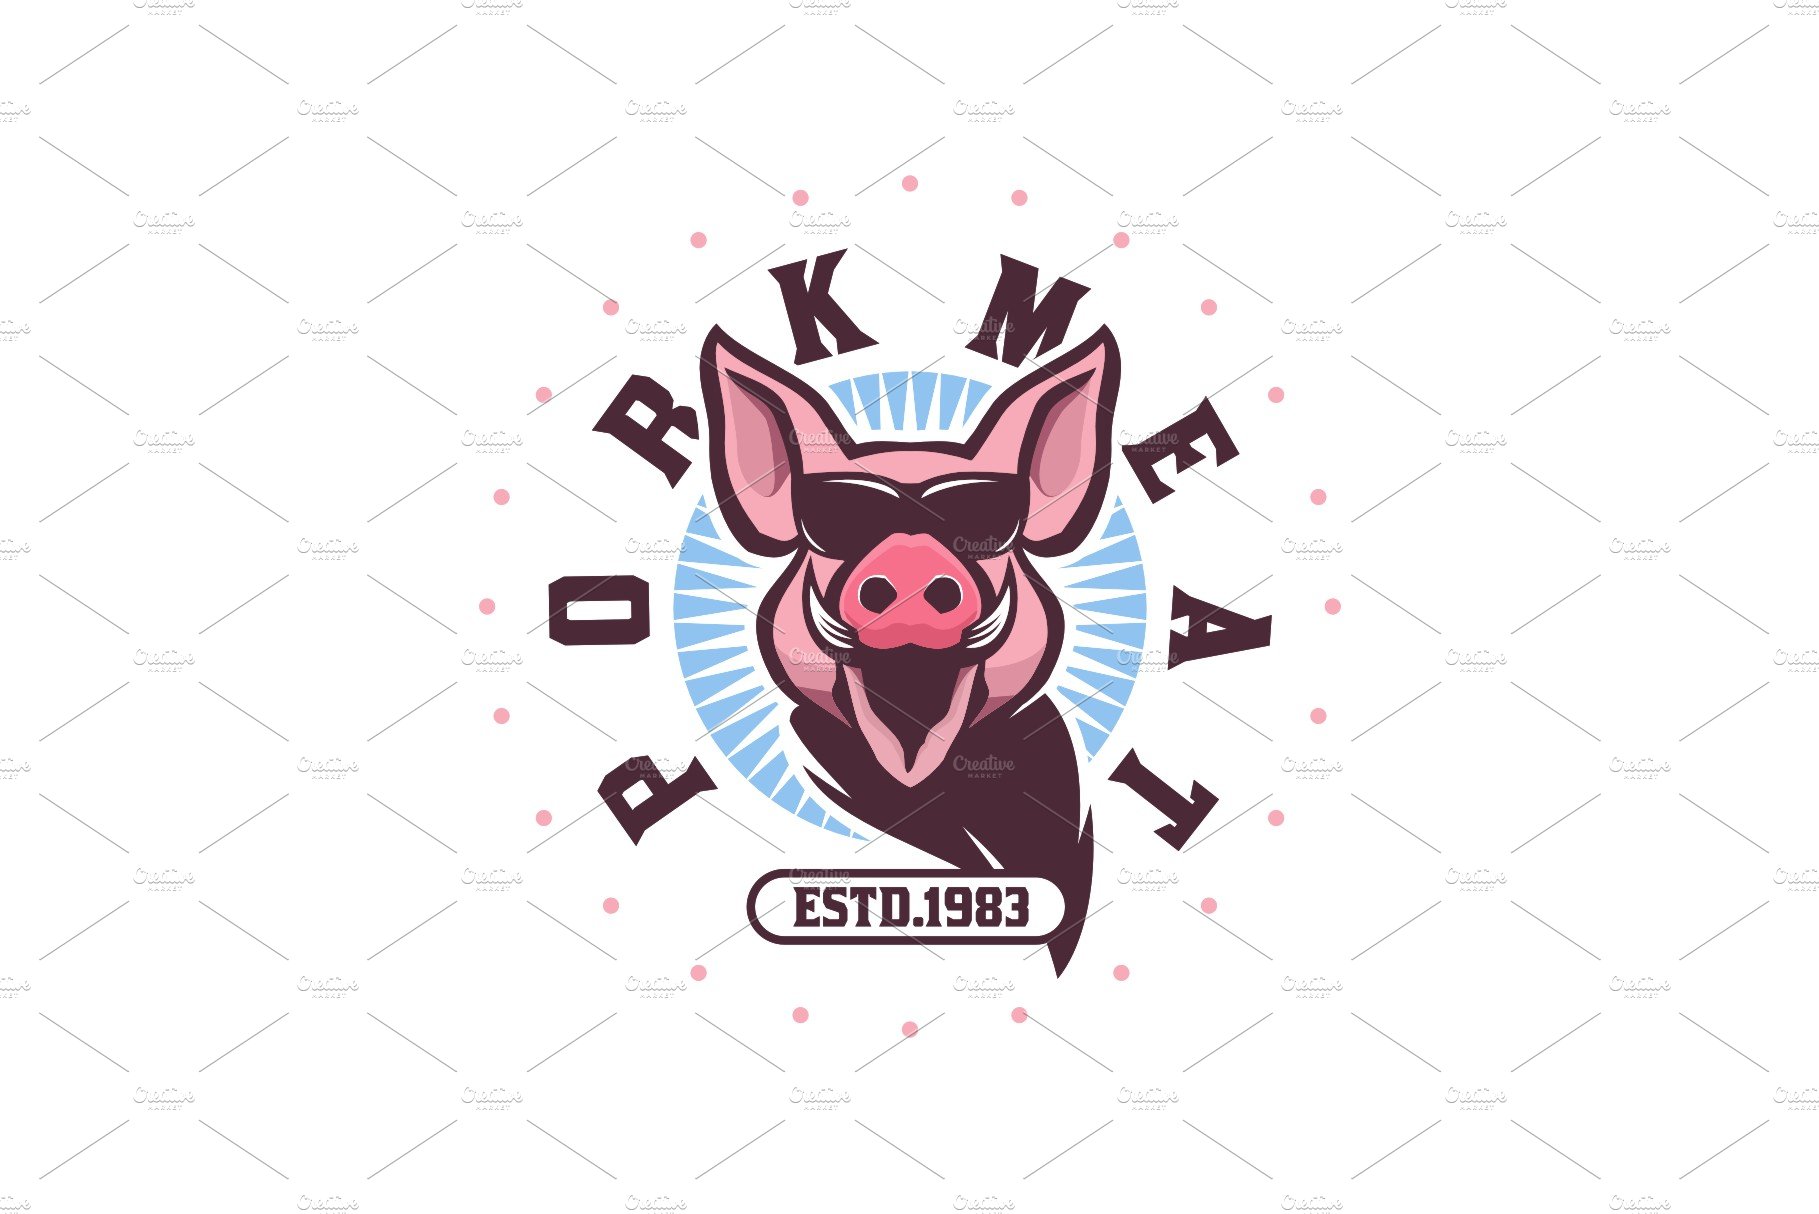 Pork Meat cover image.